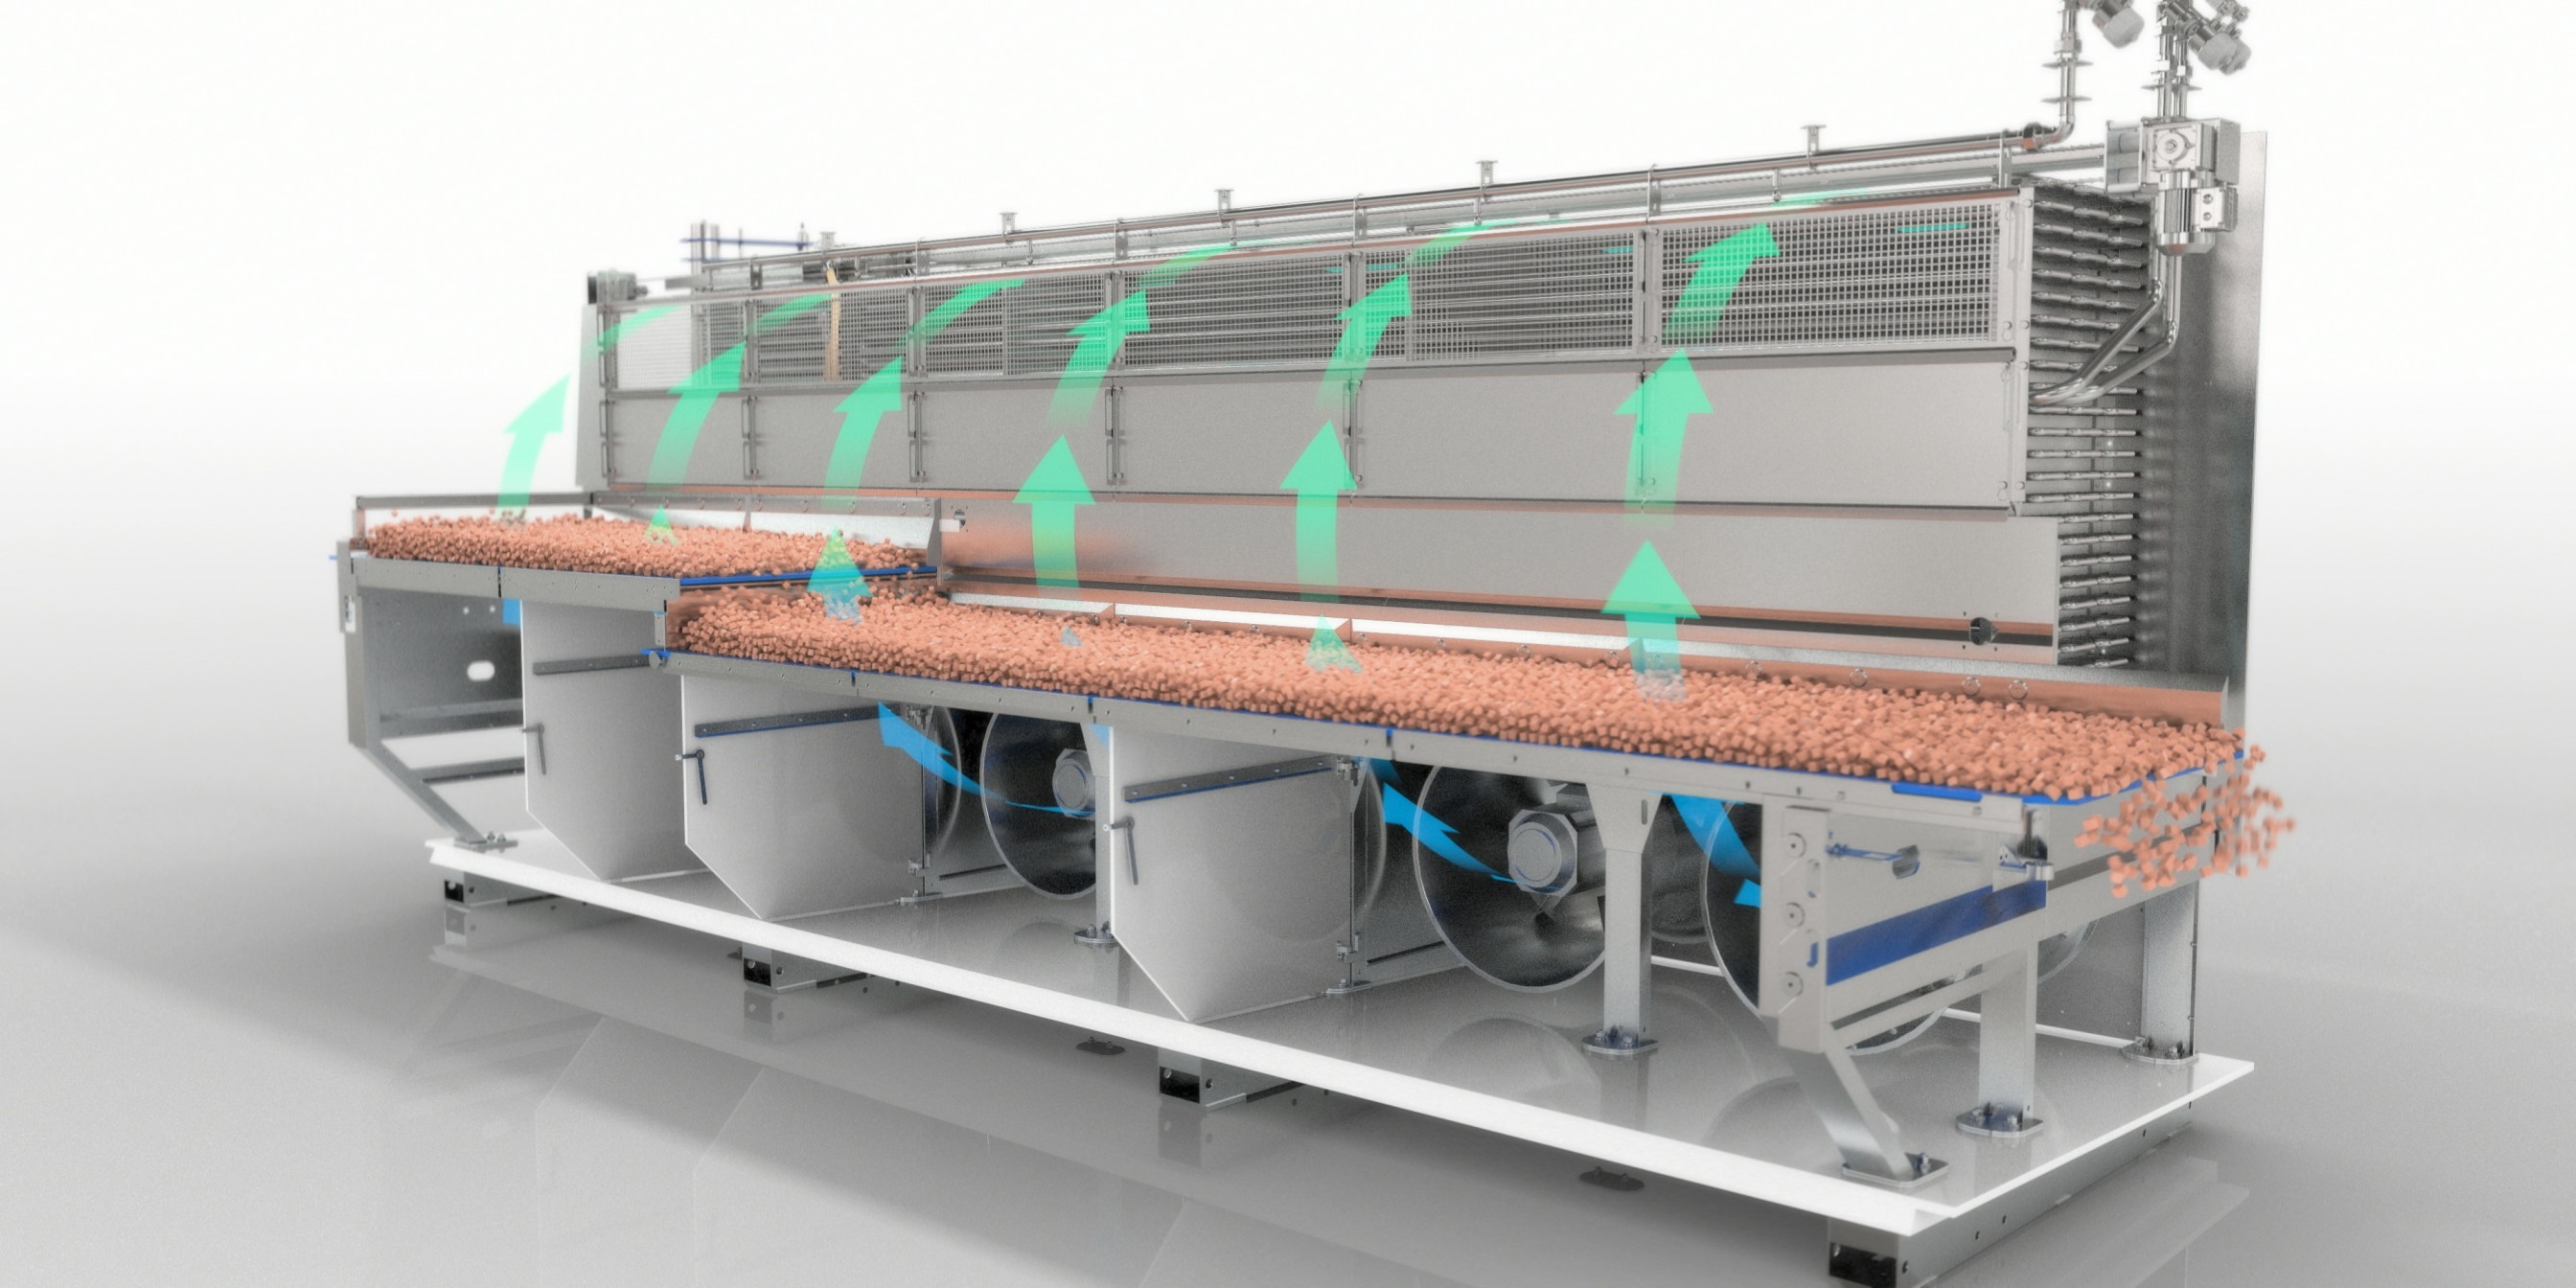 An industrial chicken freezer with a cooling system that uses fans and airflow. The conveyor bedplates carry processed chicken pieces, with arrows indicating the direction of the airflow from the fans below the bedplate to the cooling unit above.